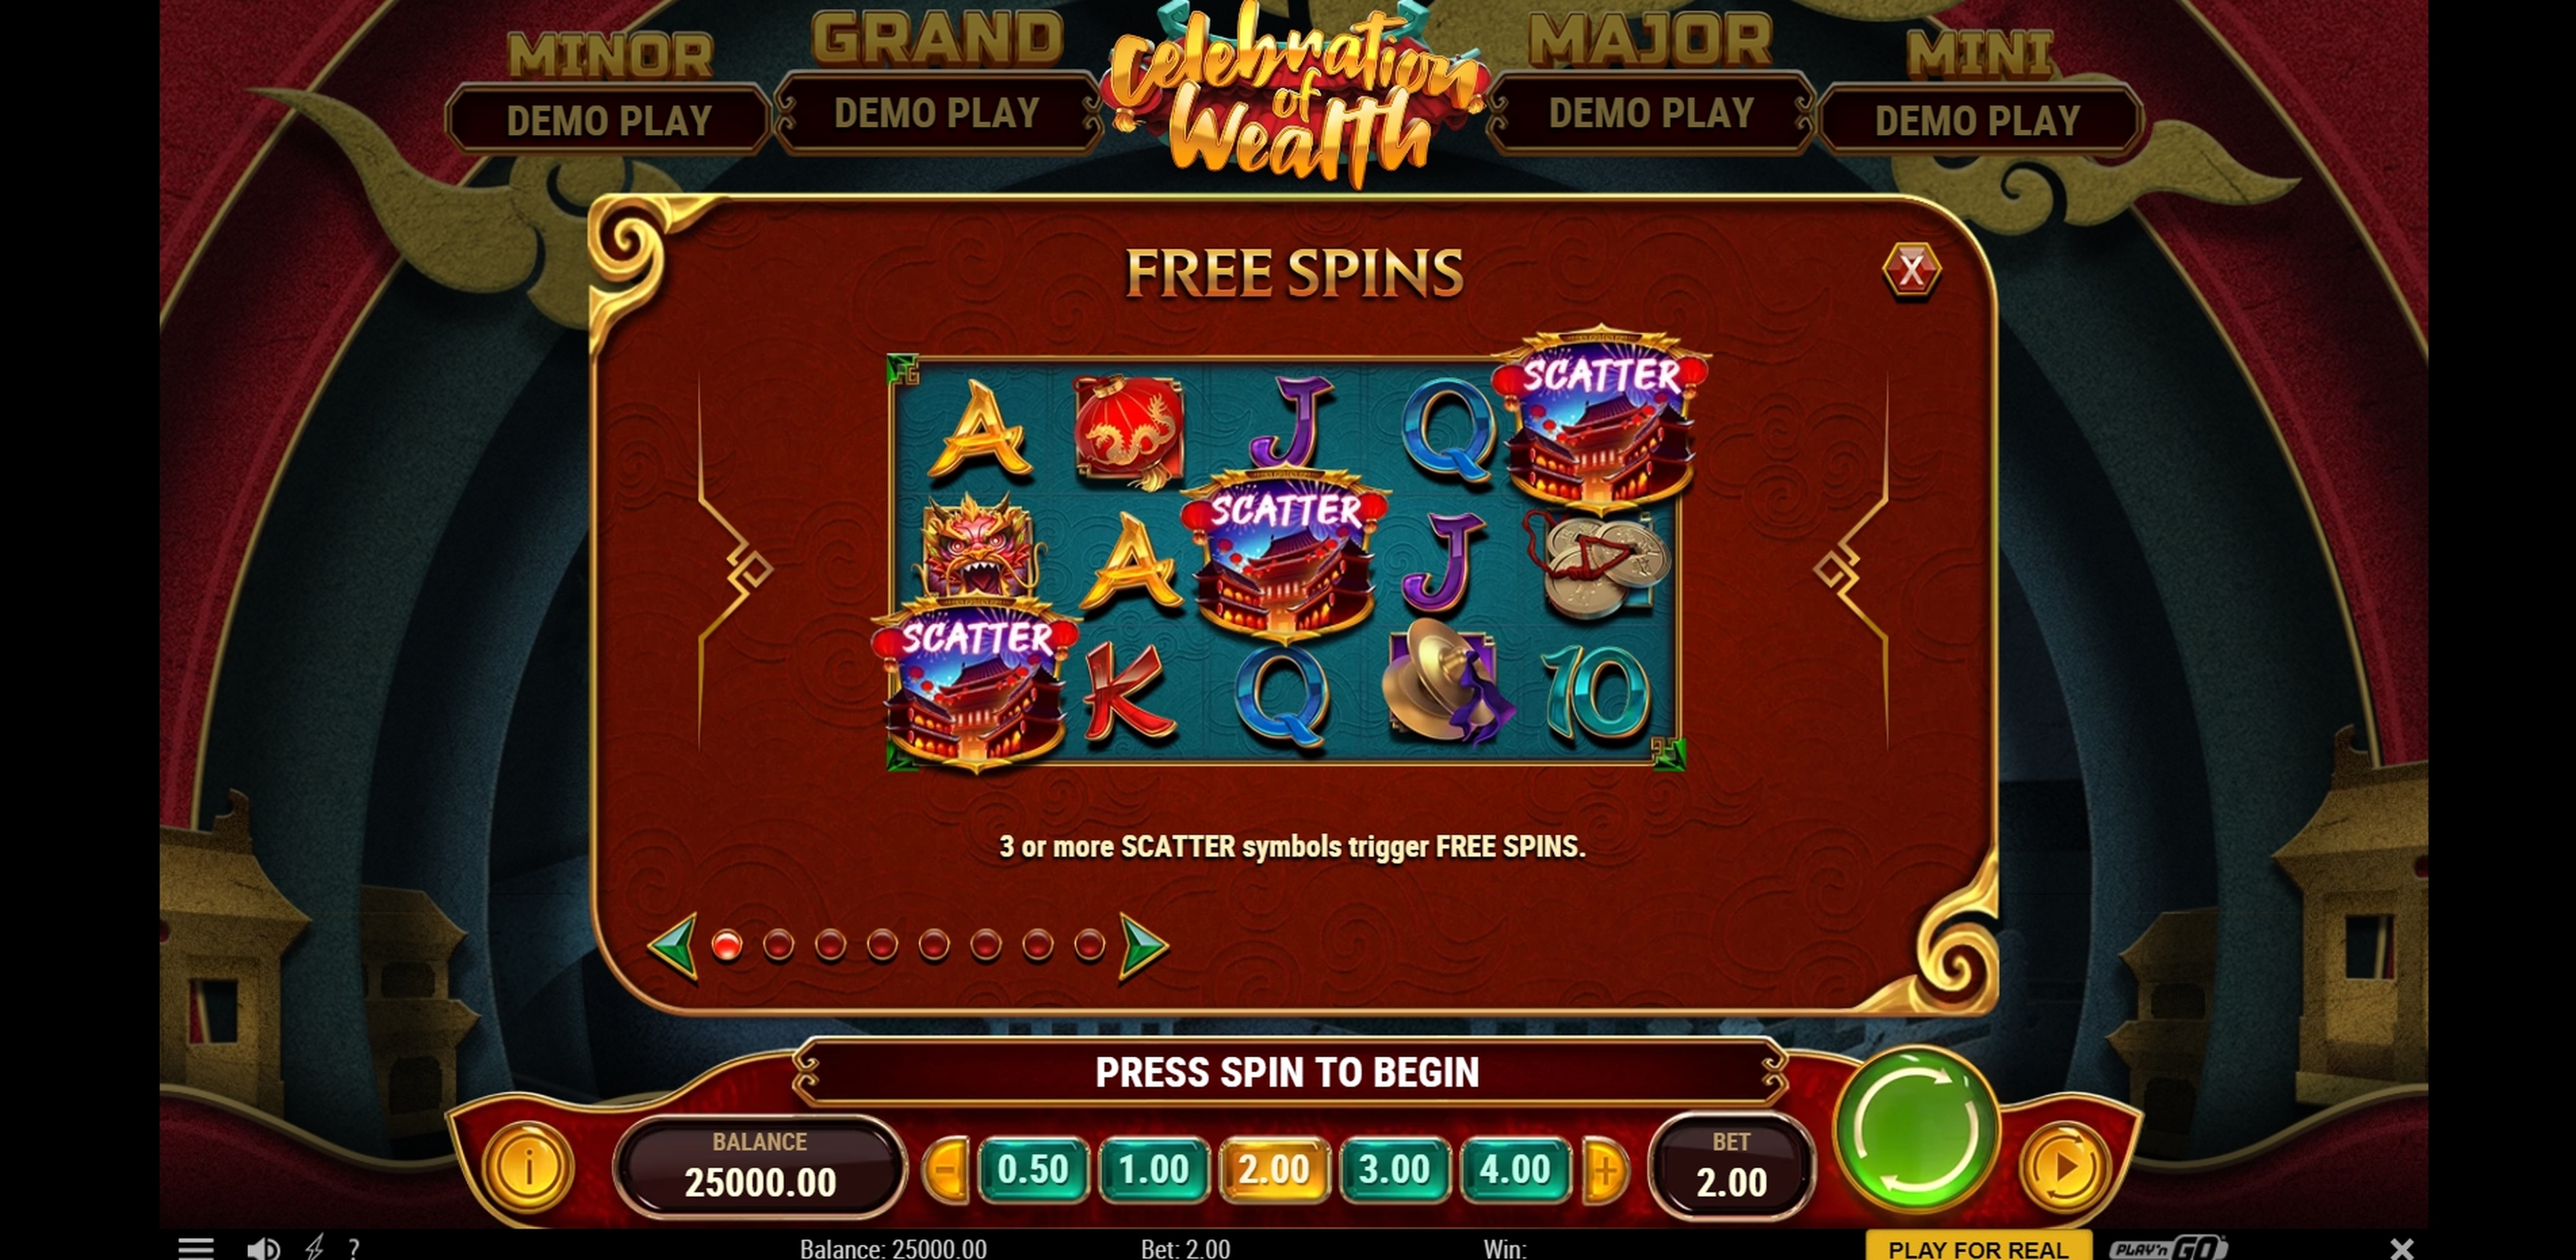 Info of Celebration of Wealth Slot Game by Playn GO